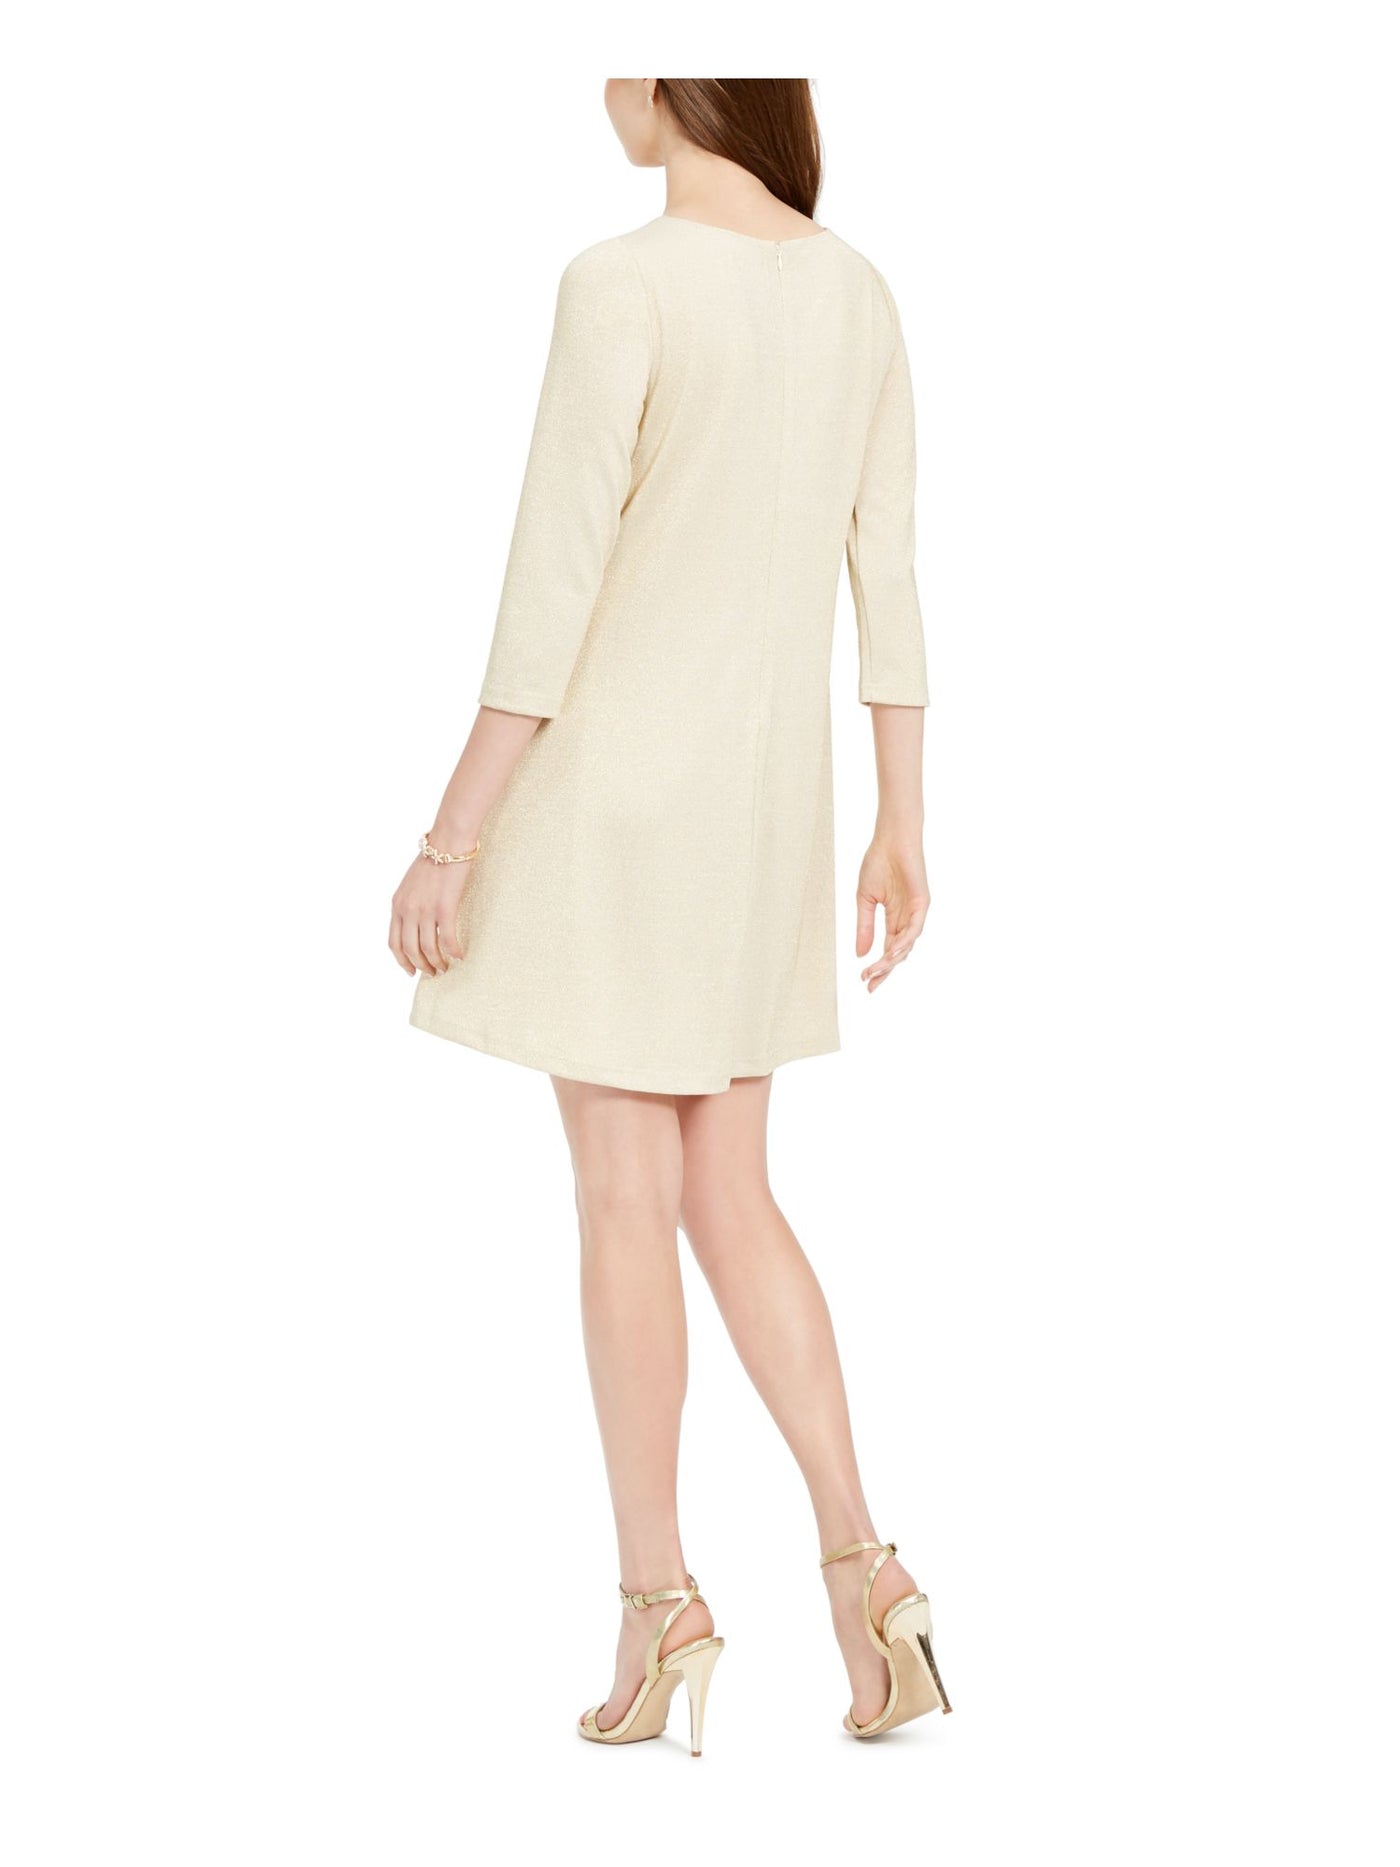 PAPPAGALLO Womens Gold Embellished 3/4 Sleeve Jewel Neck Mini Party Trapeze Dress L